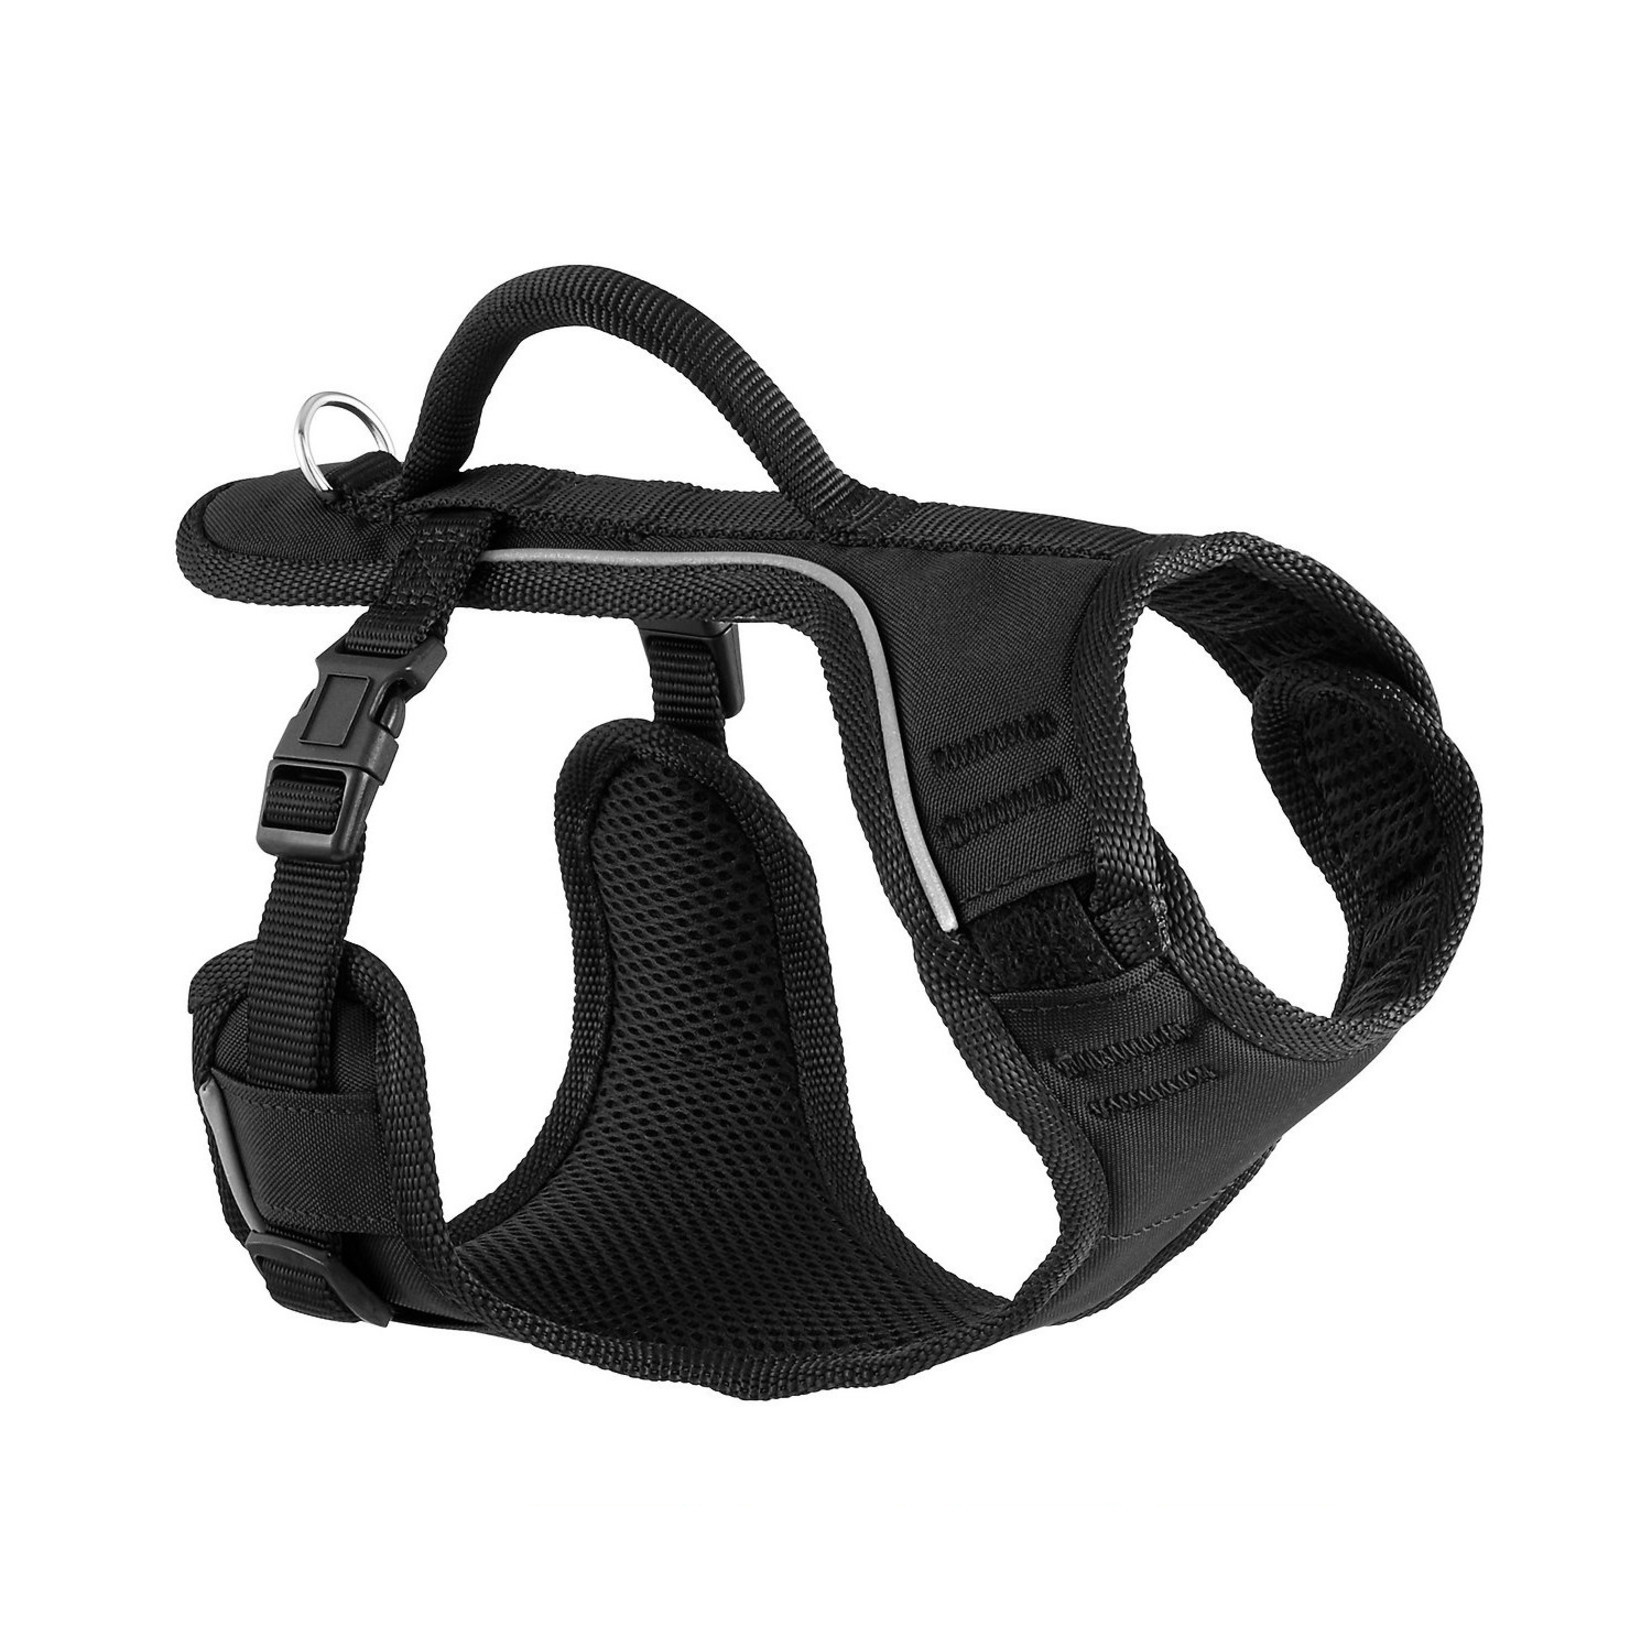 PetSafe PetSafe Easysport Padded Mesh Dog Harness with Handle and Back Clip Attachment